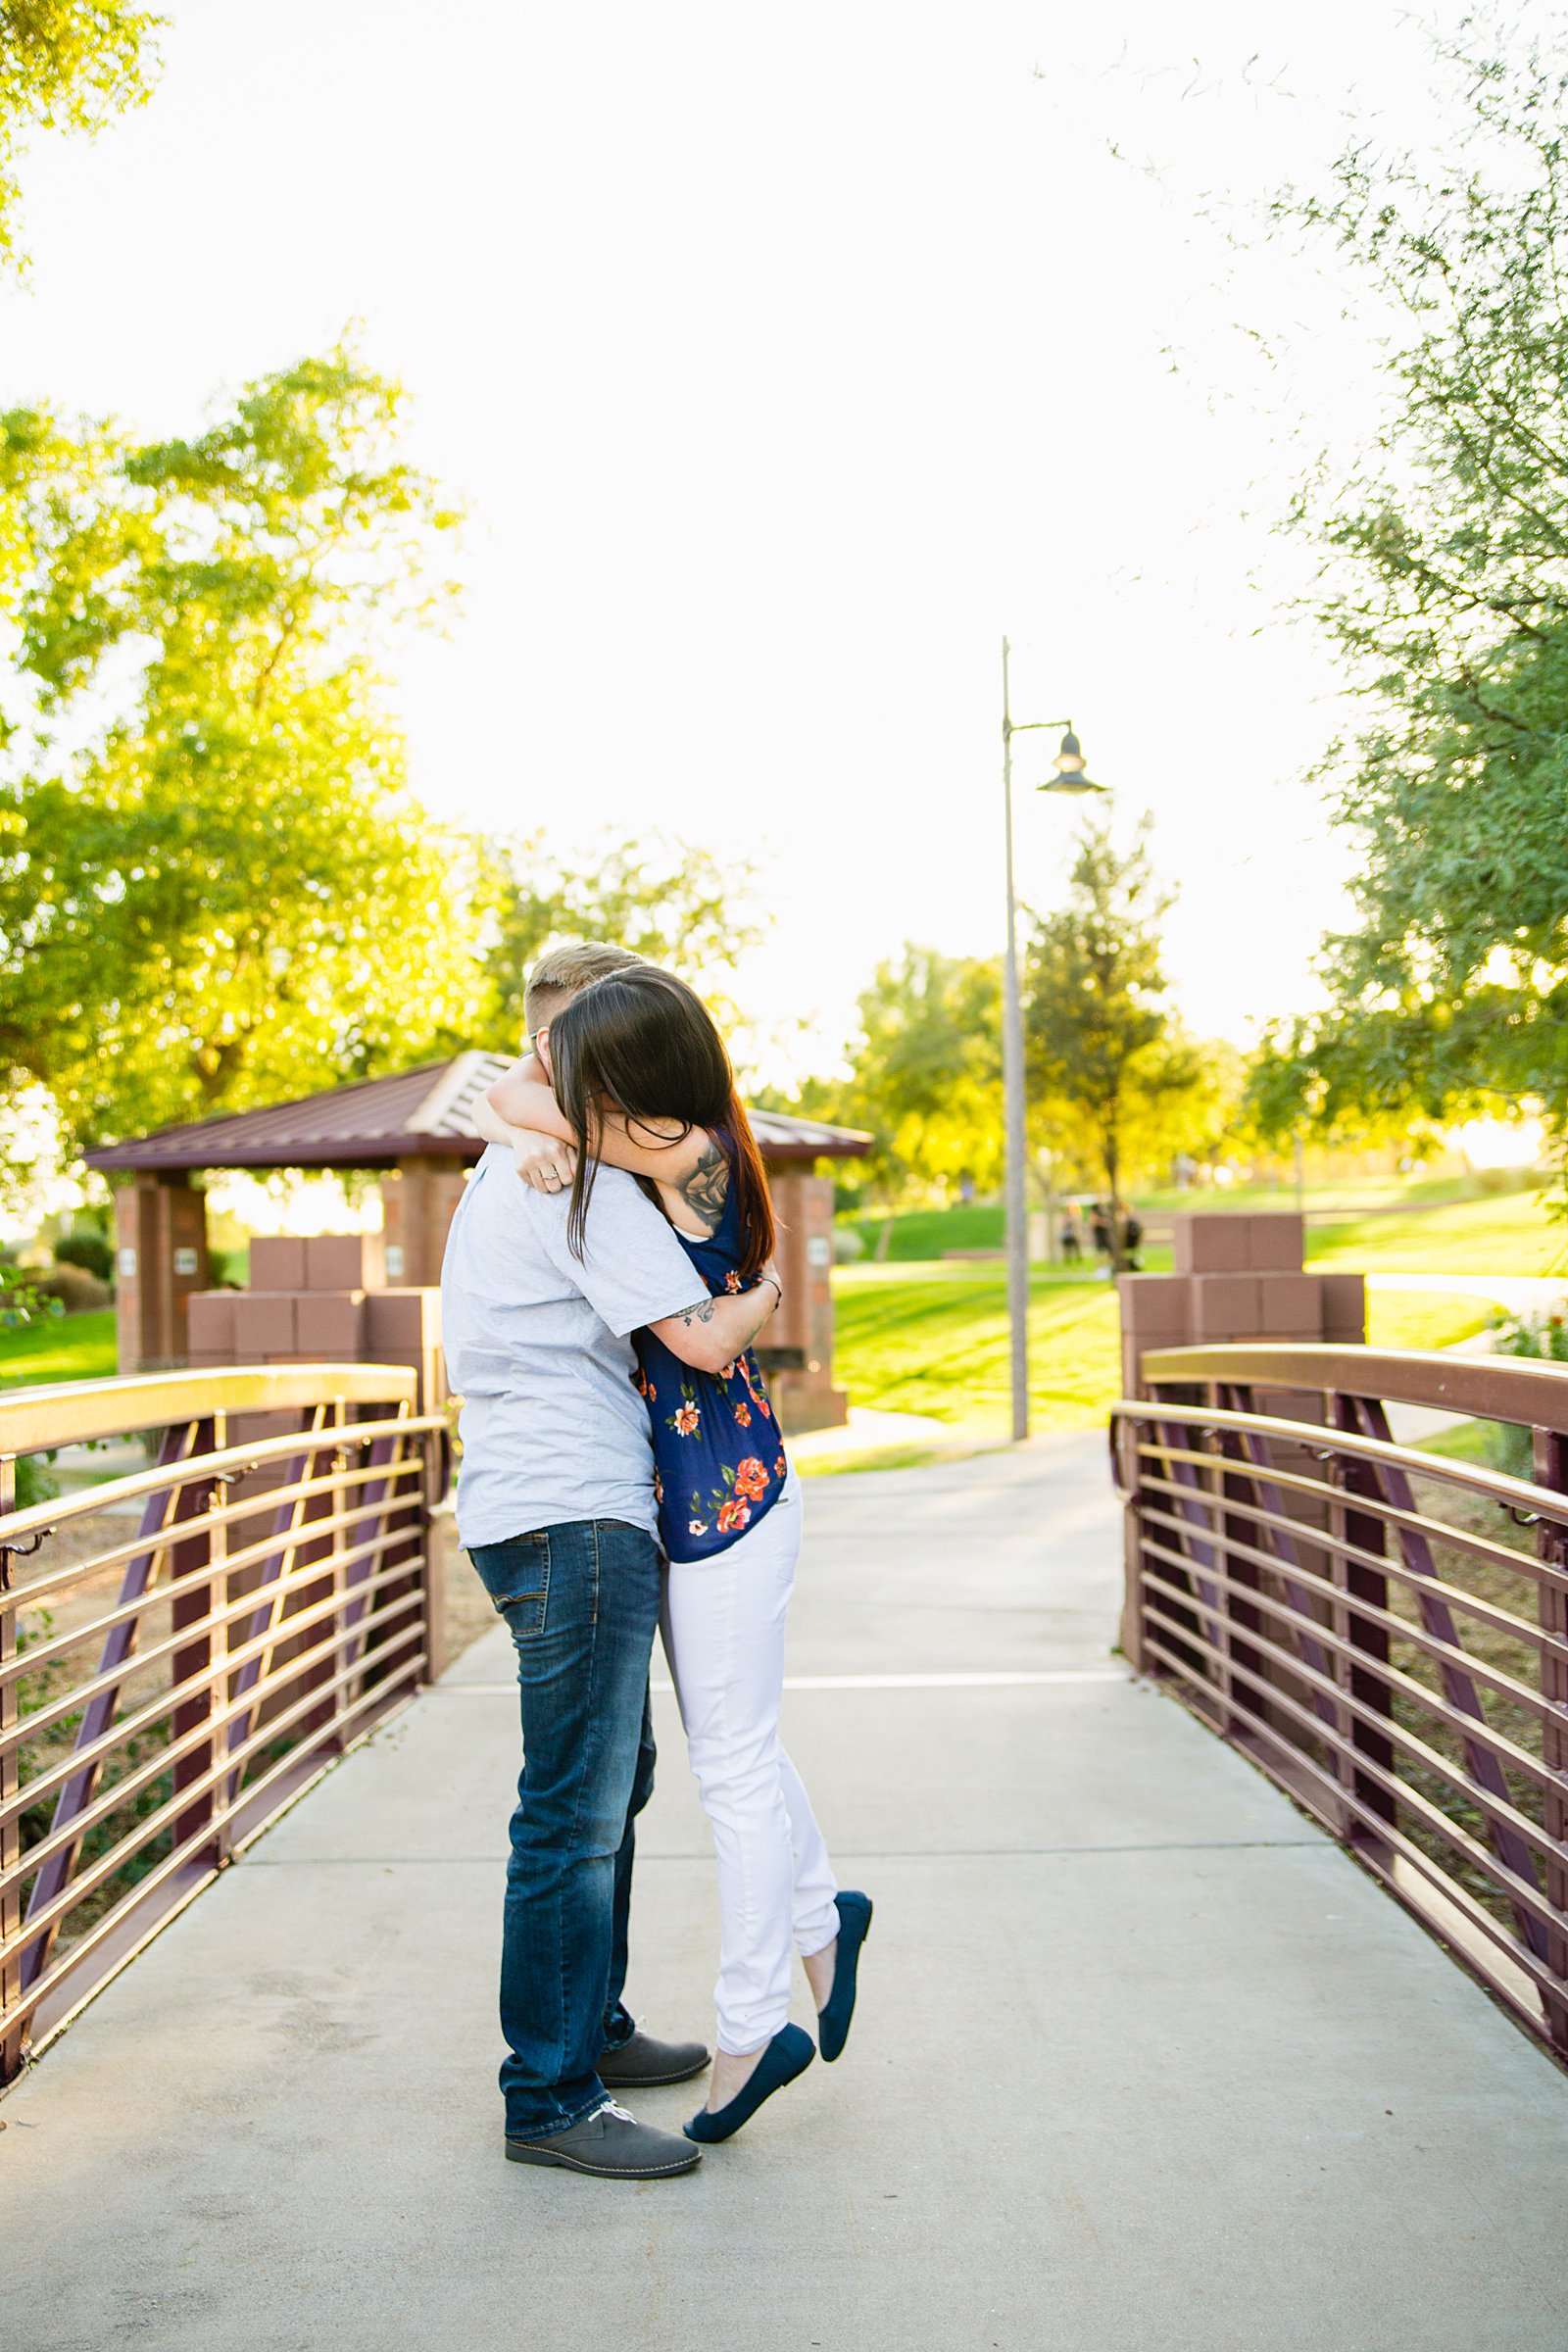 Surprise engagement session during an Anthem Park couples session by Phoenix wedding photographer PMA Photography.